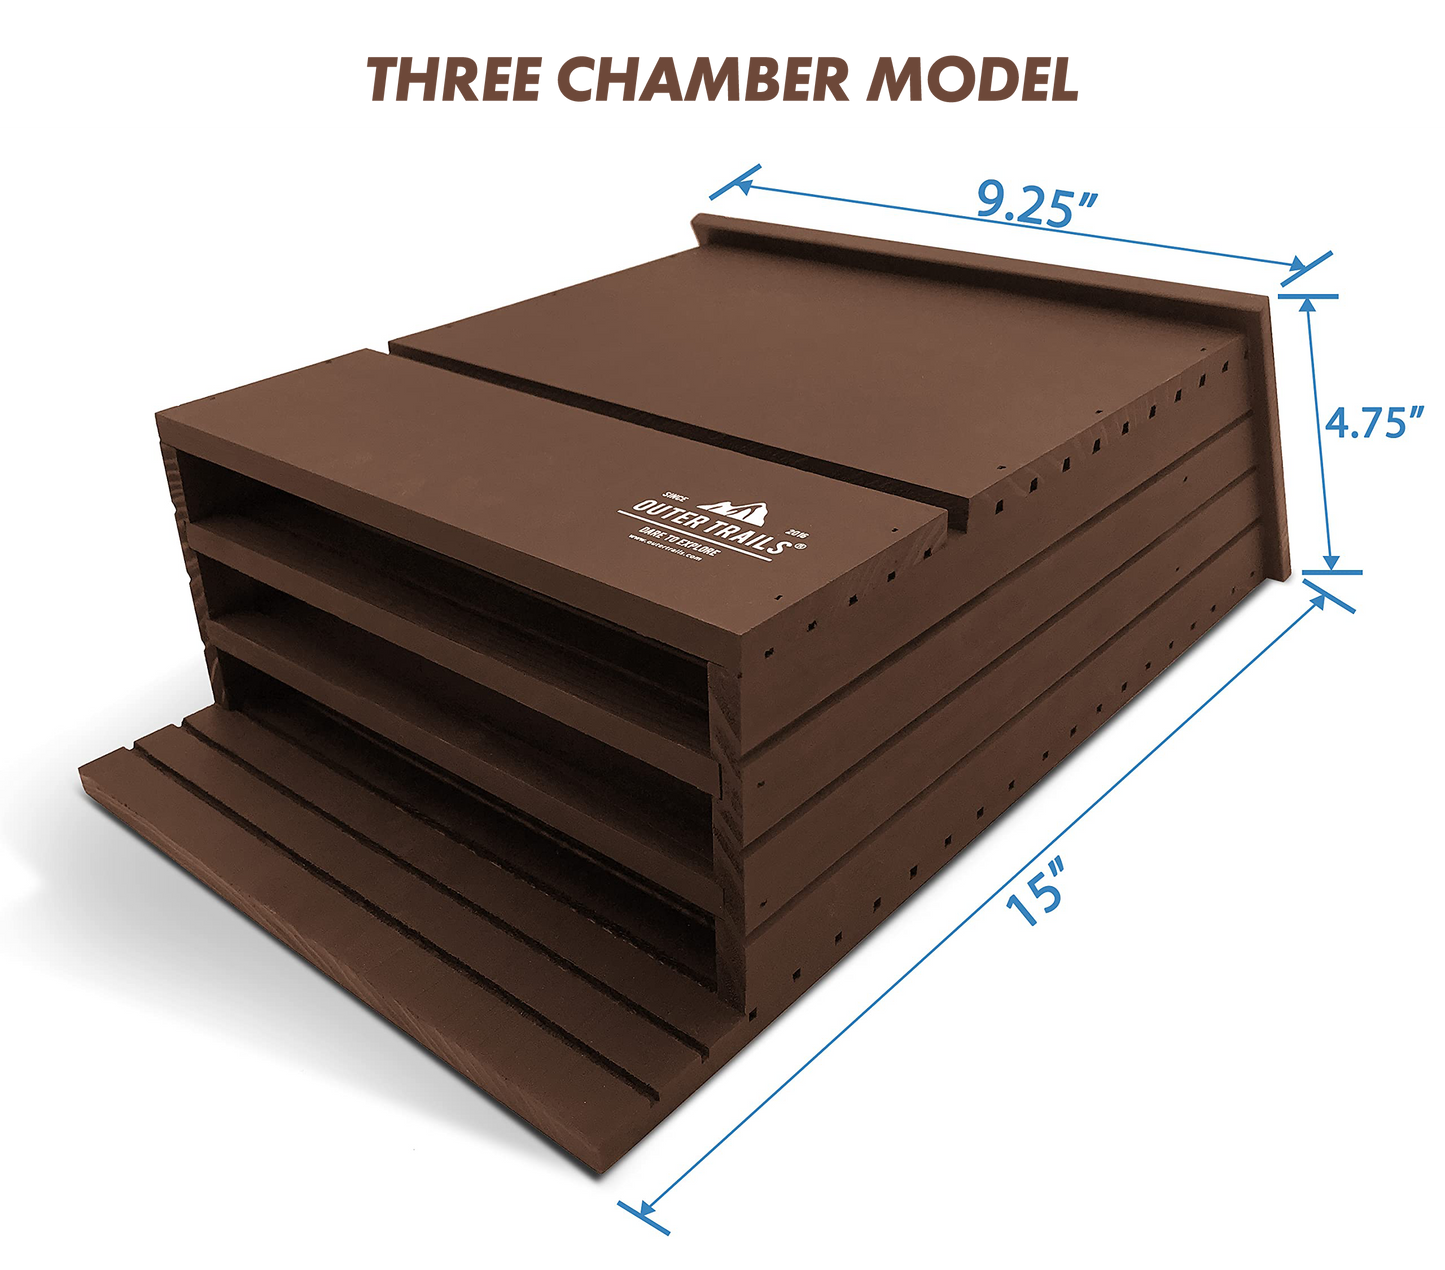 Measurement details of Outer Trails™ Three Chamber Bat House